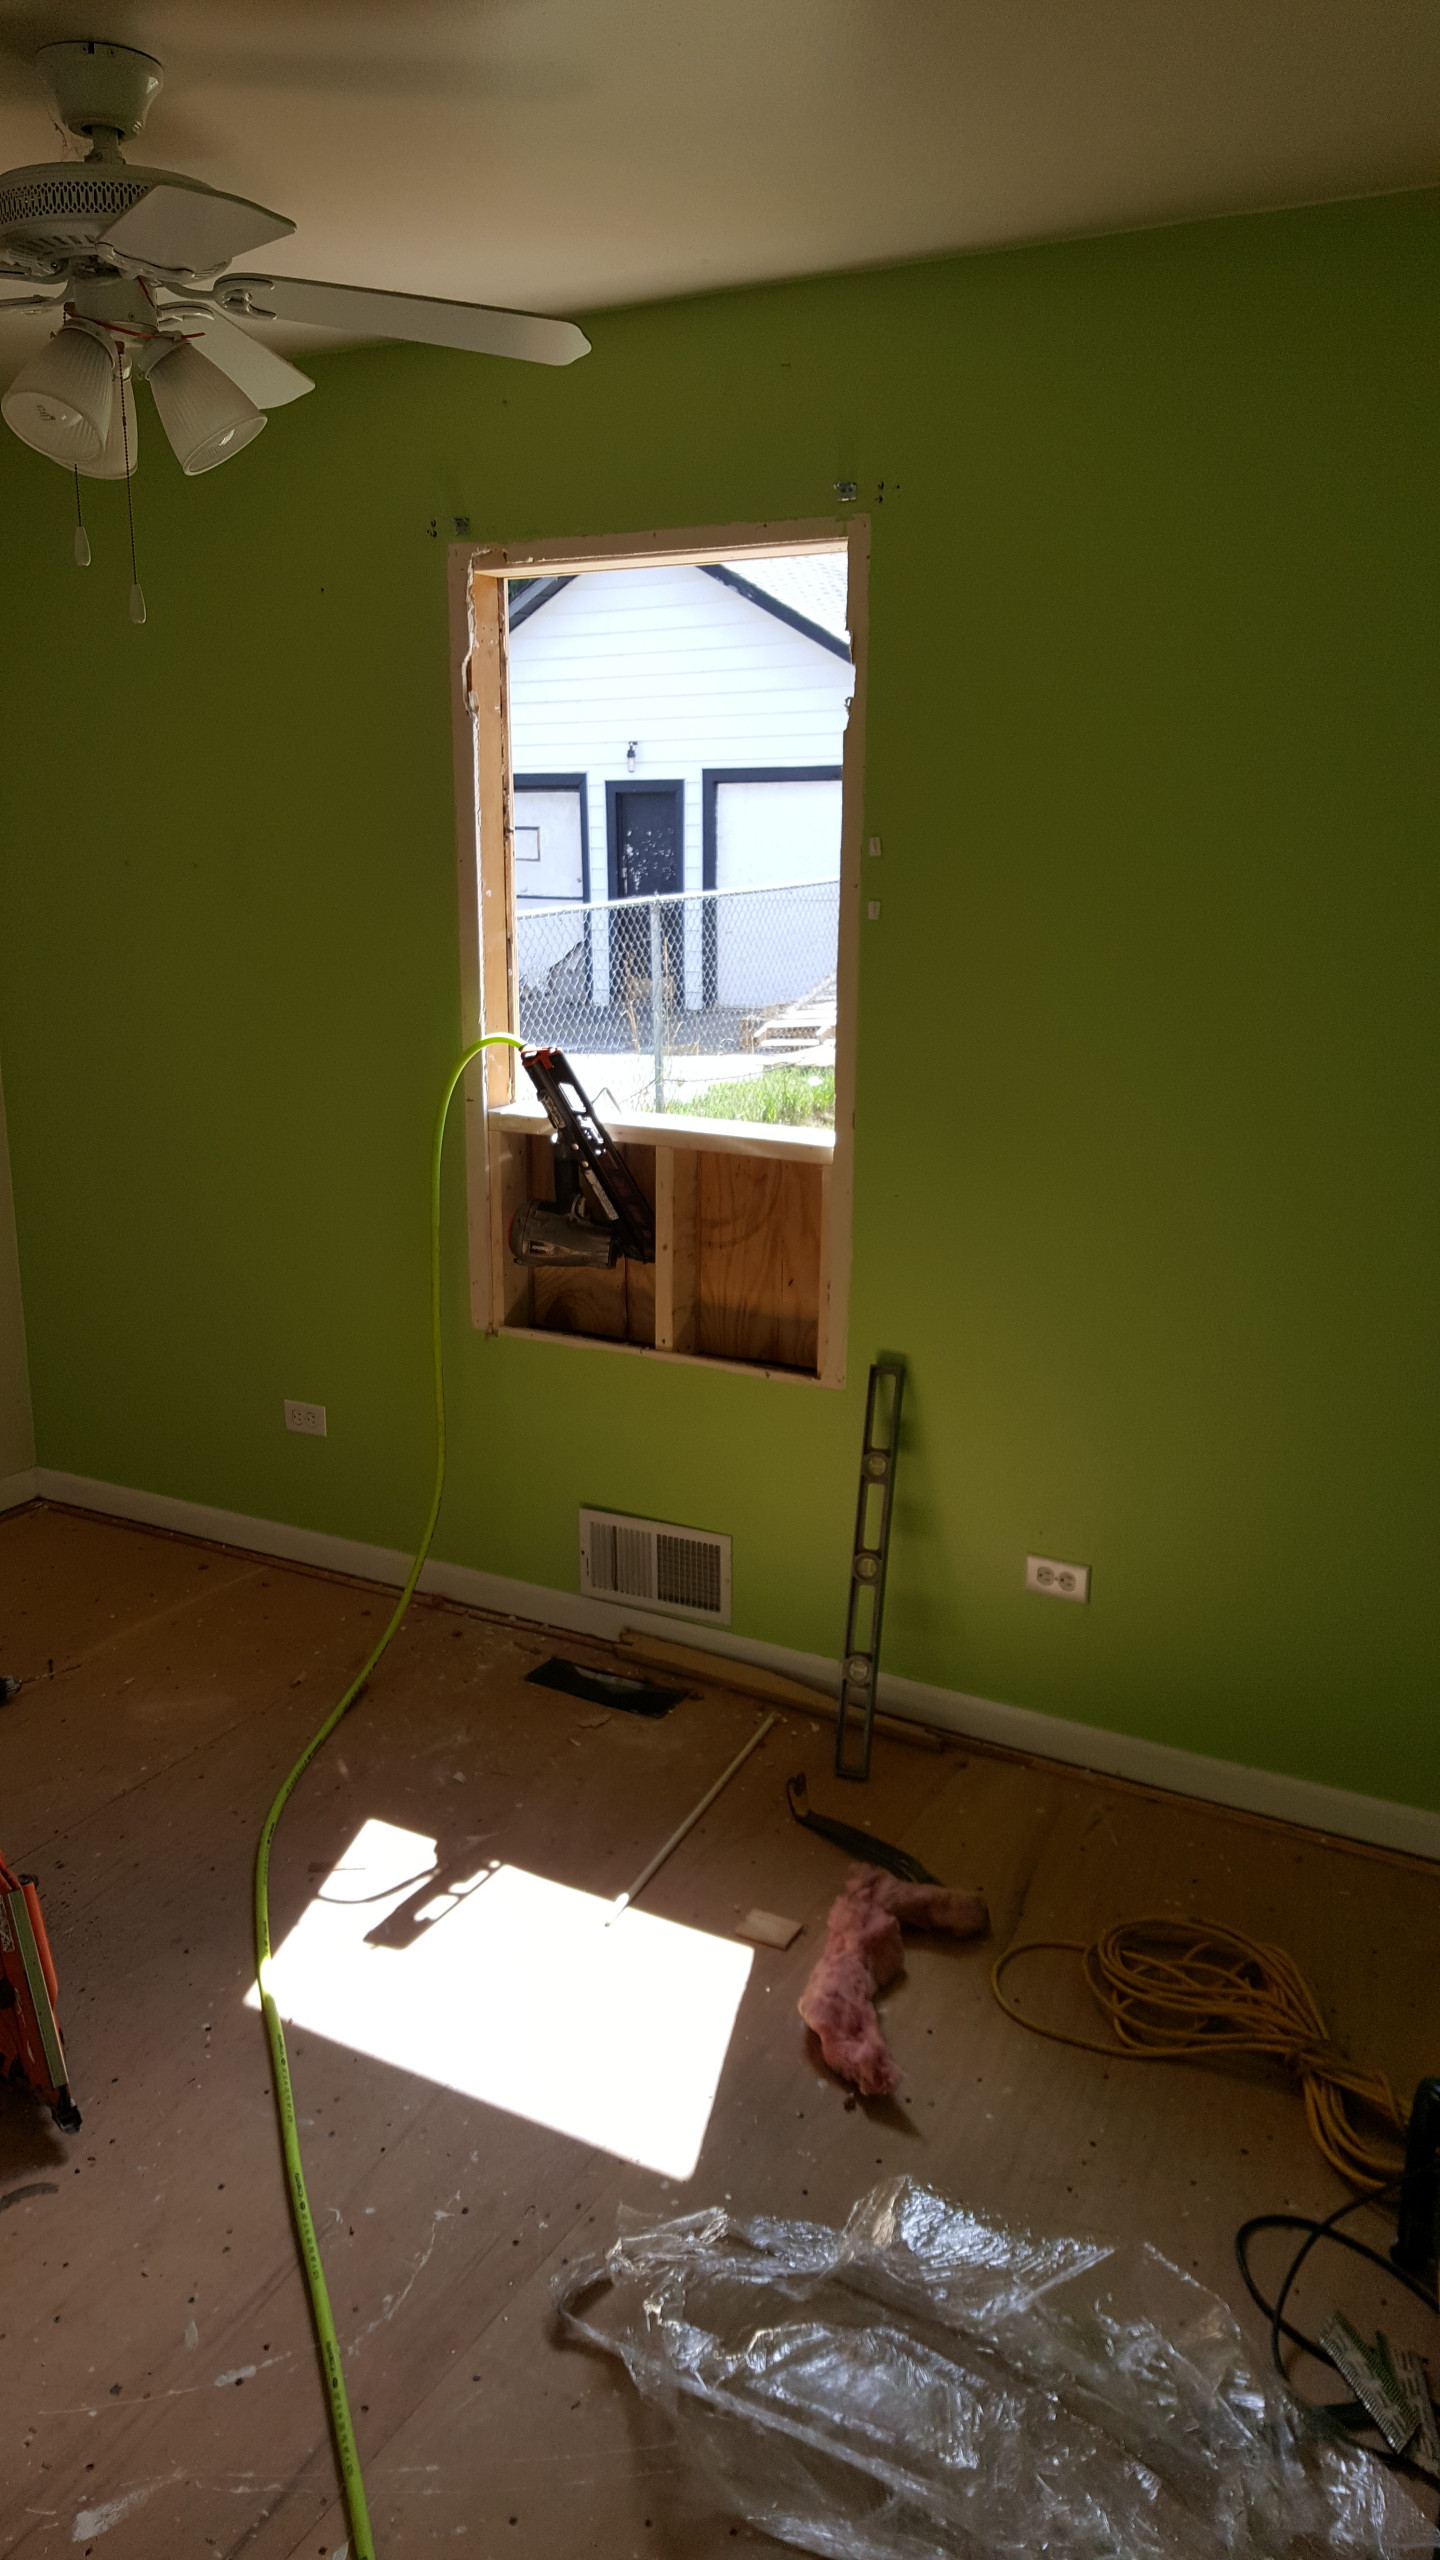 Modifying window sizes...this small bedroom will be the new laundry/utility room